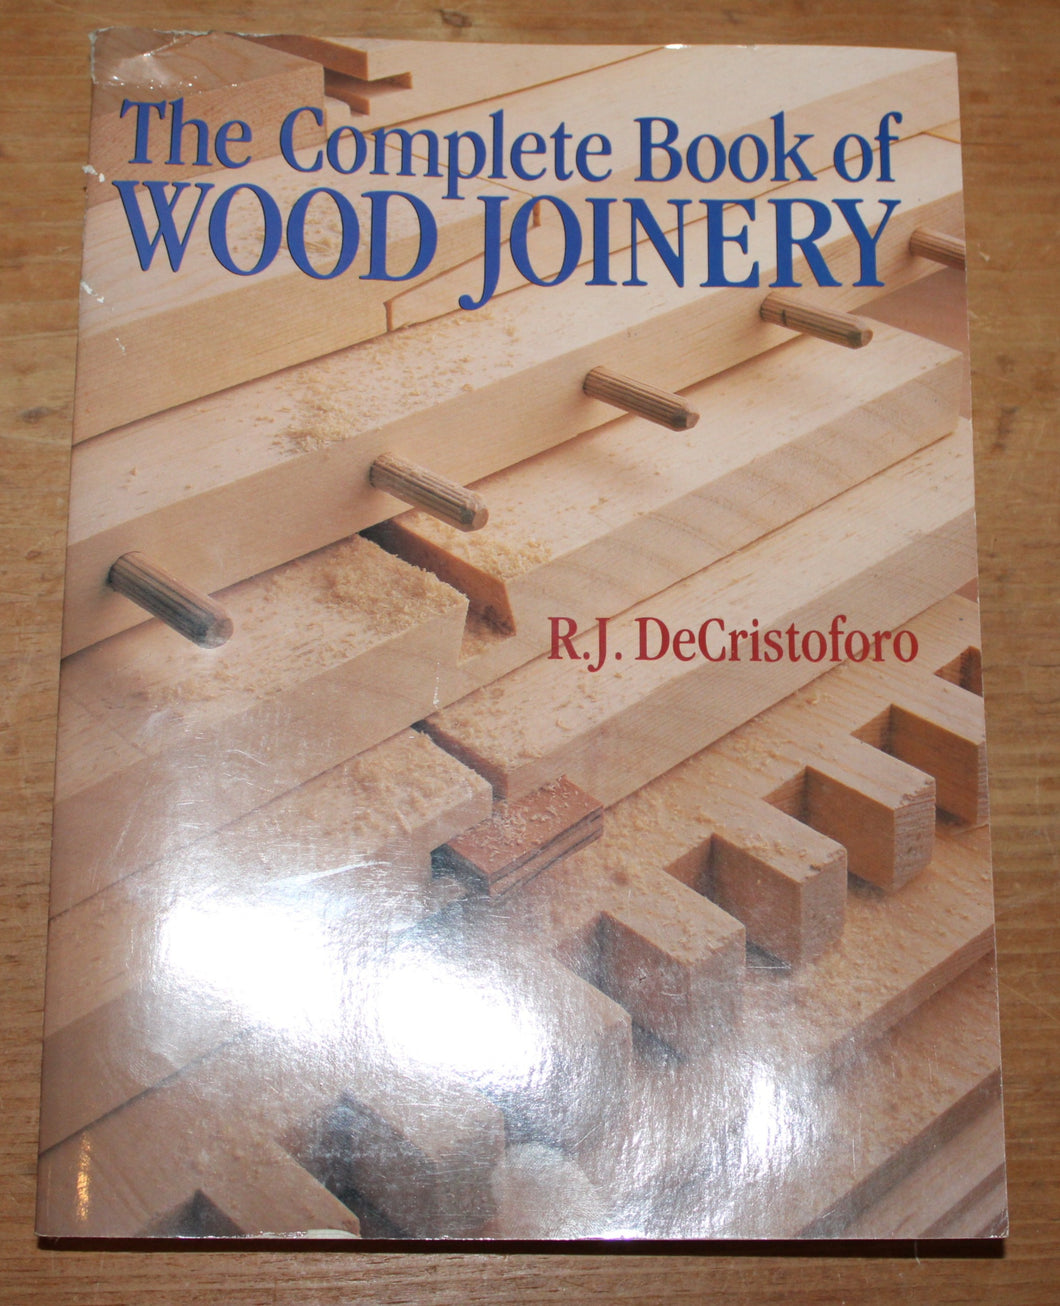 The Complete Book of Wood Joinery R.J.DeCristoforo